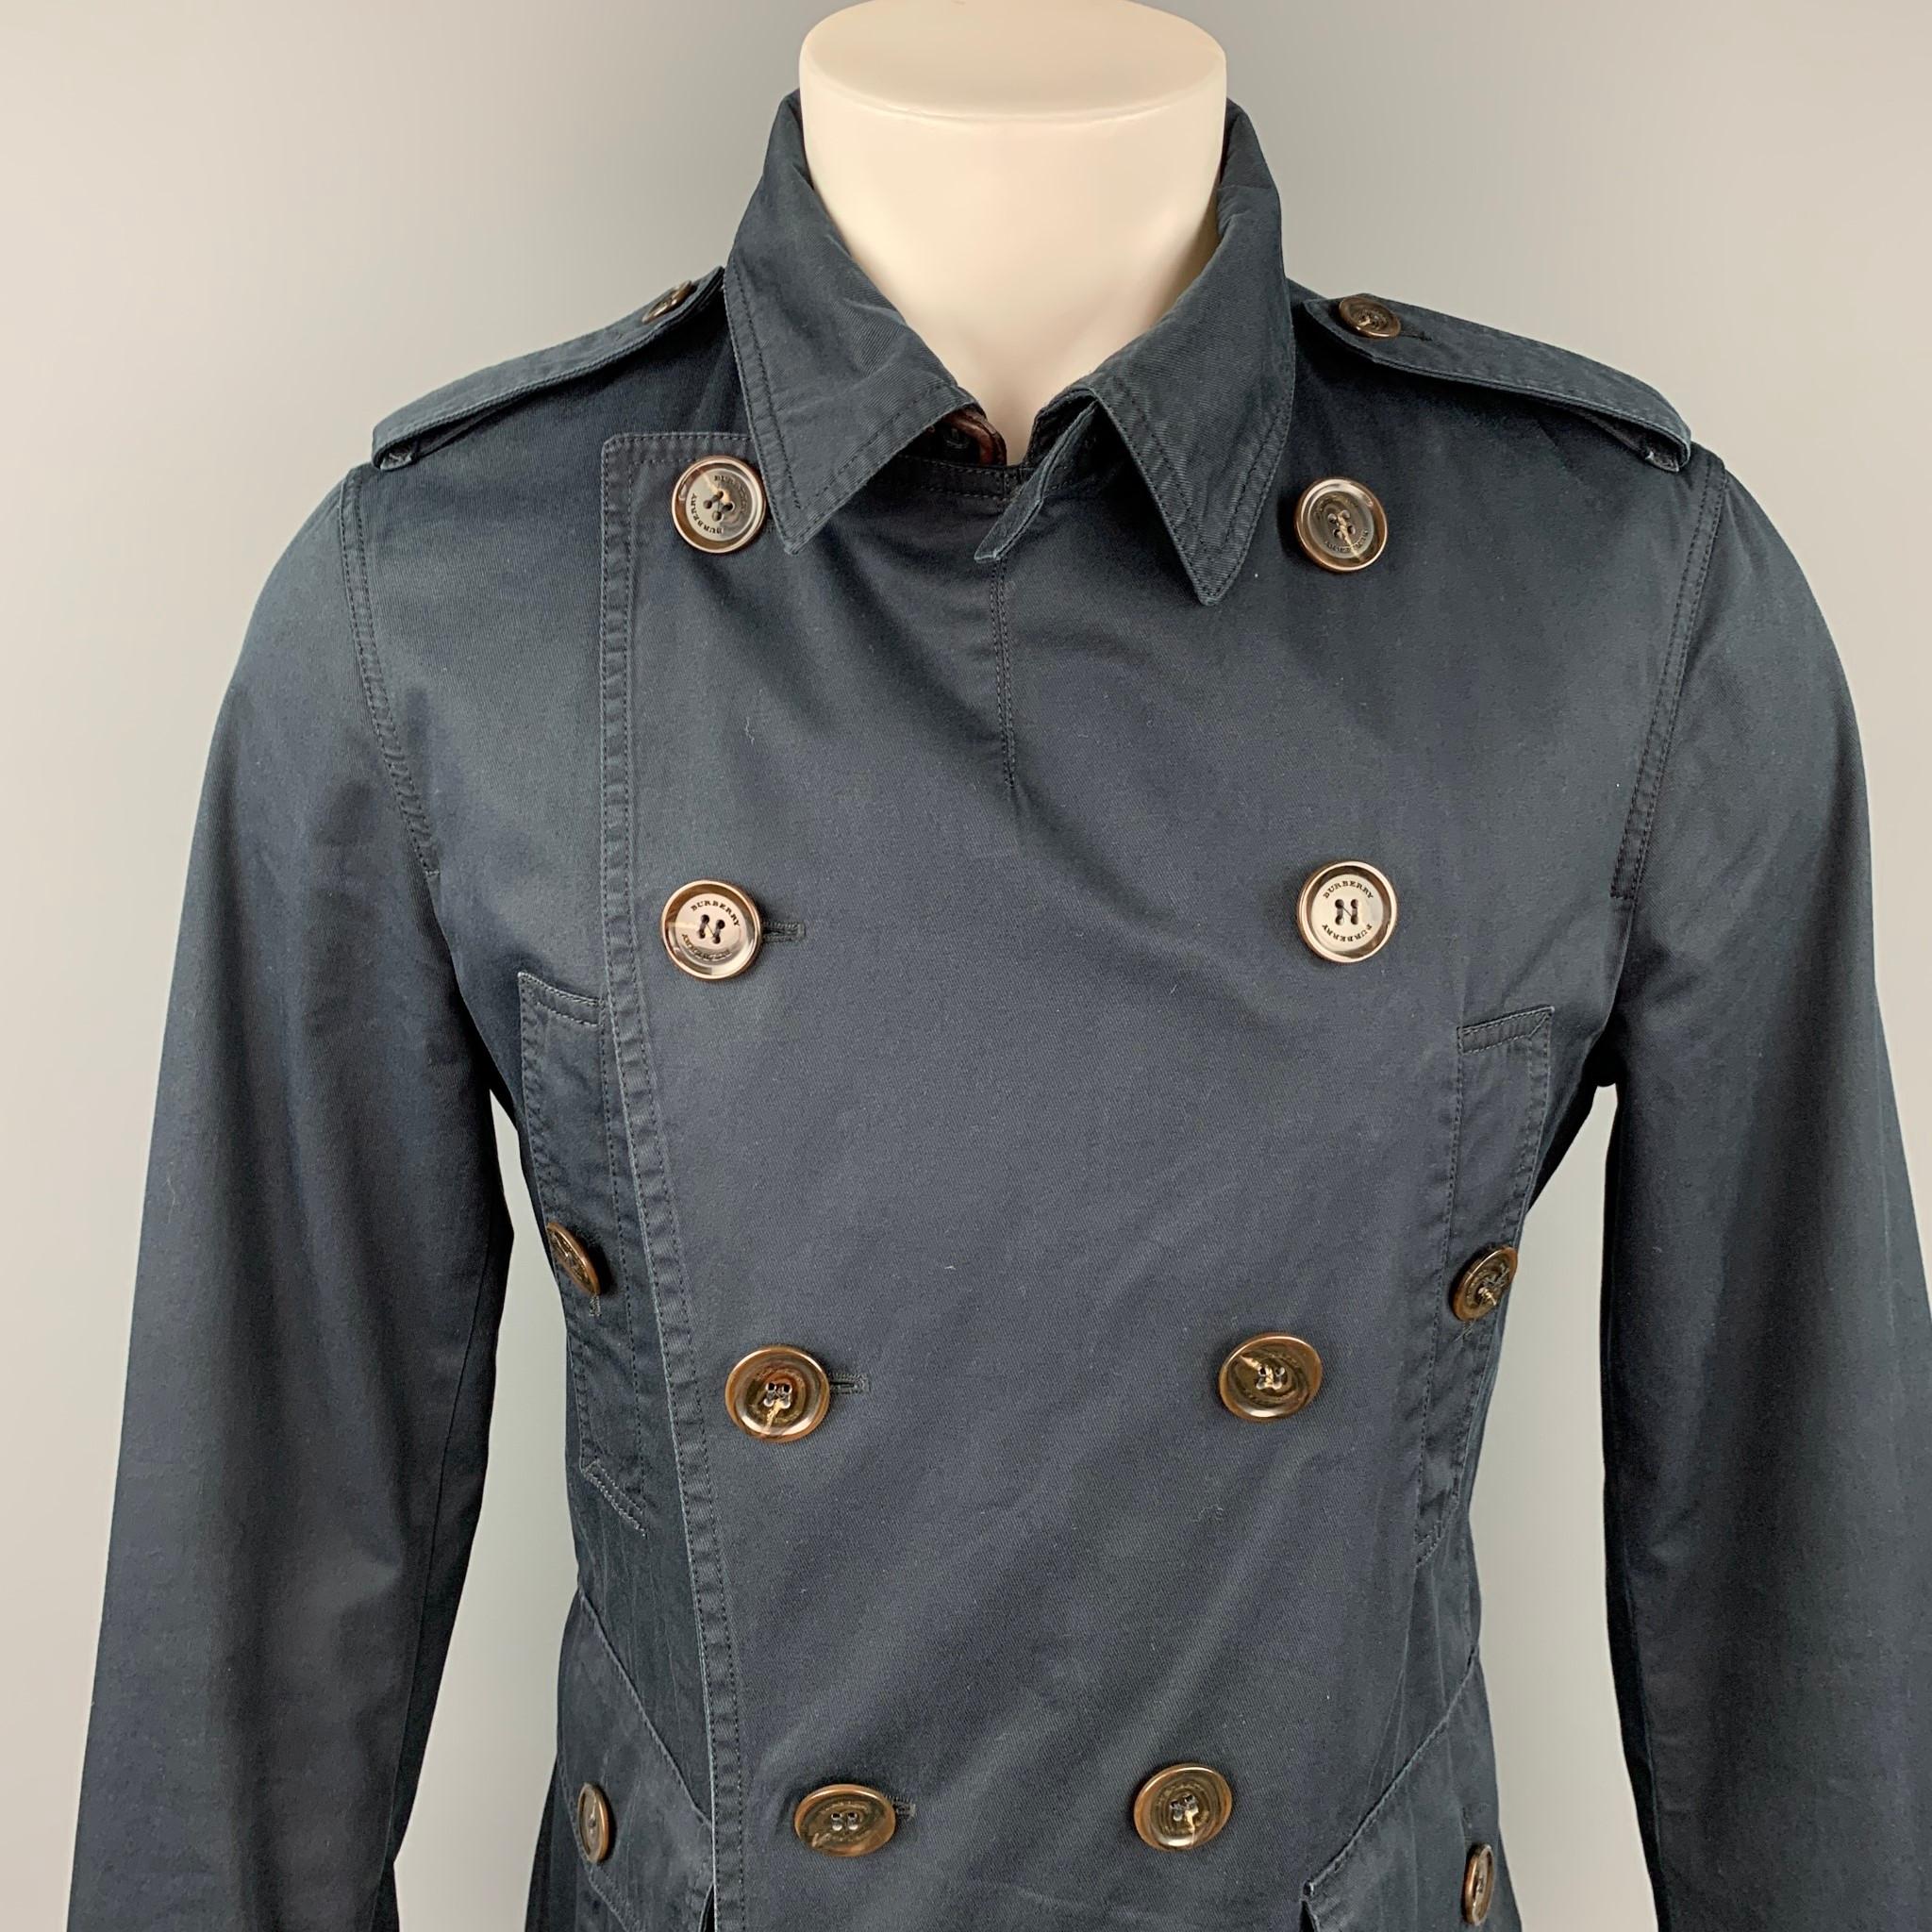 BURBERRY LONDON coat comes in a navy cotton / polyurethane with a full liner featuring patch pockets, epaulettes, sleeve straps, and a double breasted closure. Made in Romania.

Very Good Pre-Owned Condition.
Marked: M

Measurements:

Shoulder: 17.5